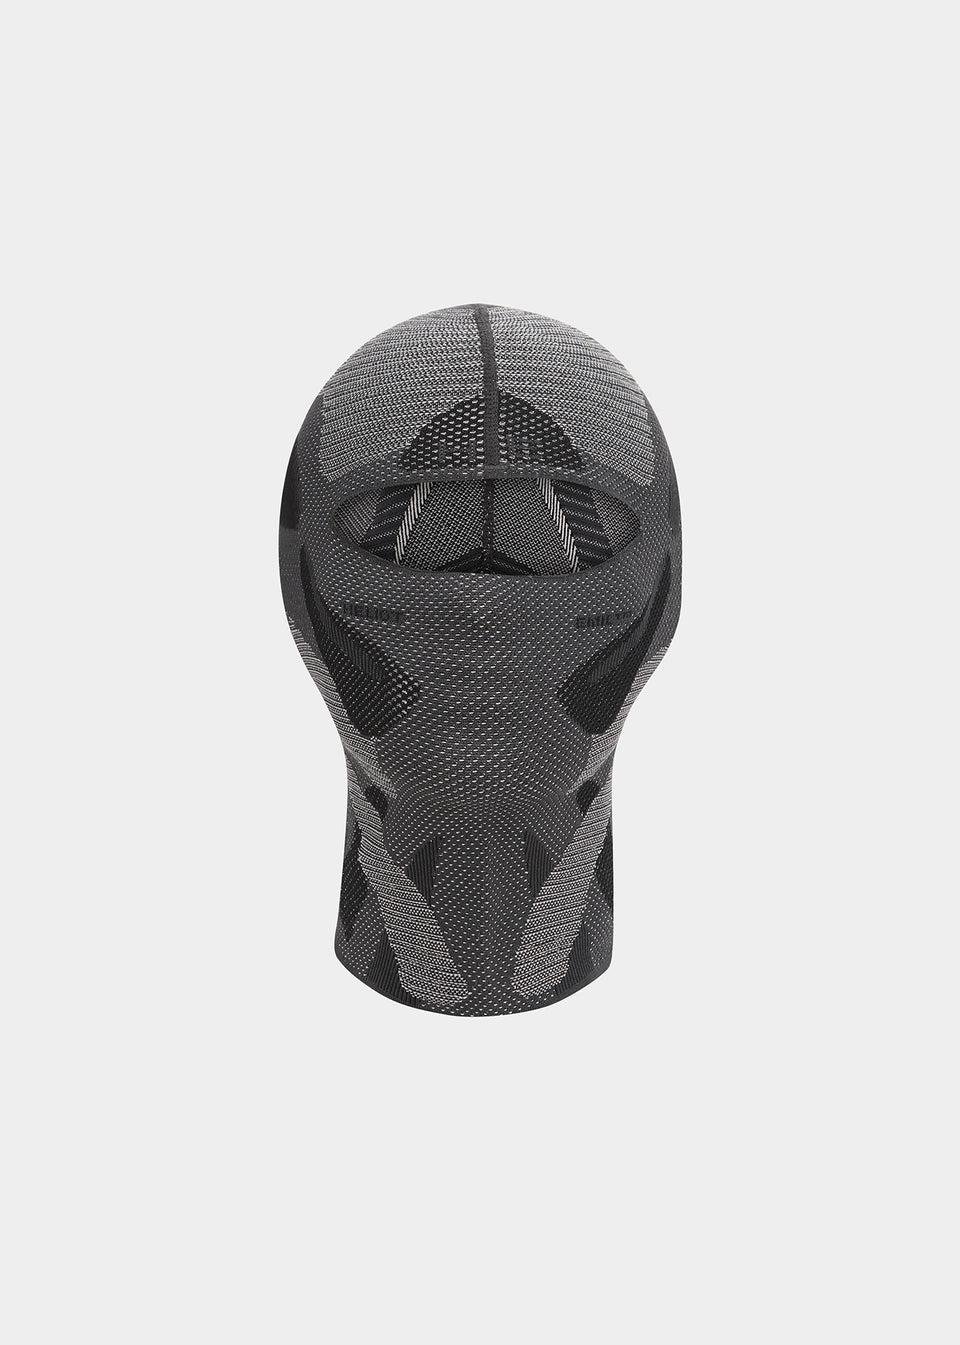 DUCTILE BALACLAVA by HELIOT EMIL